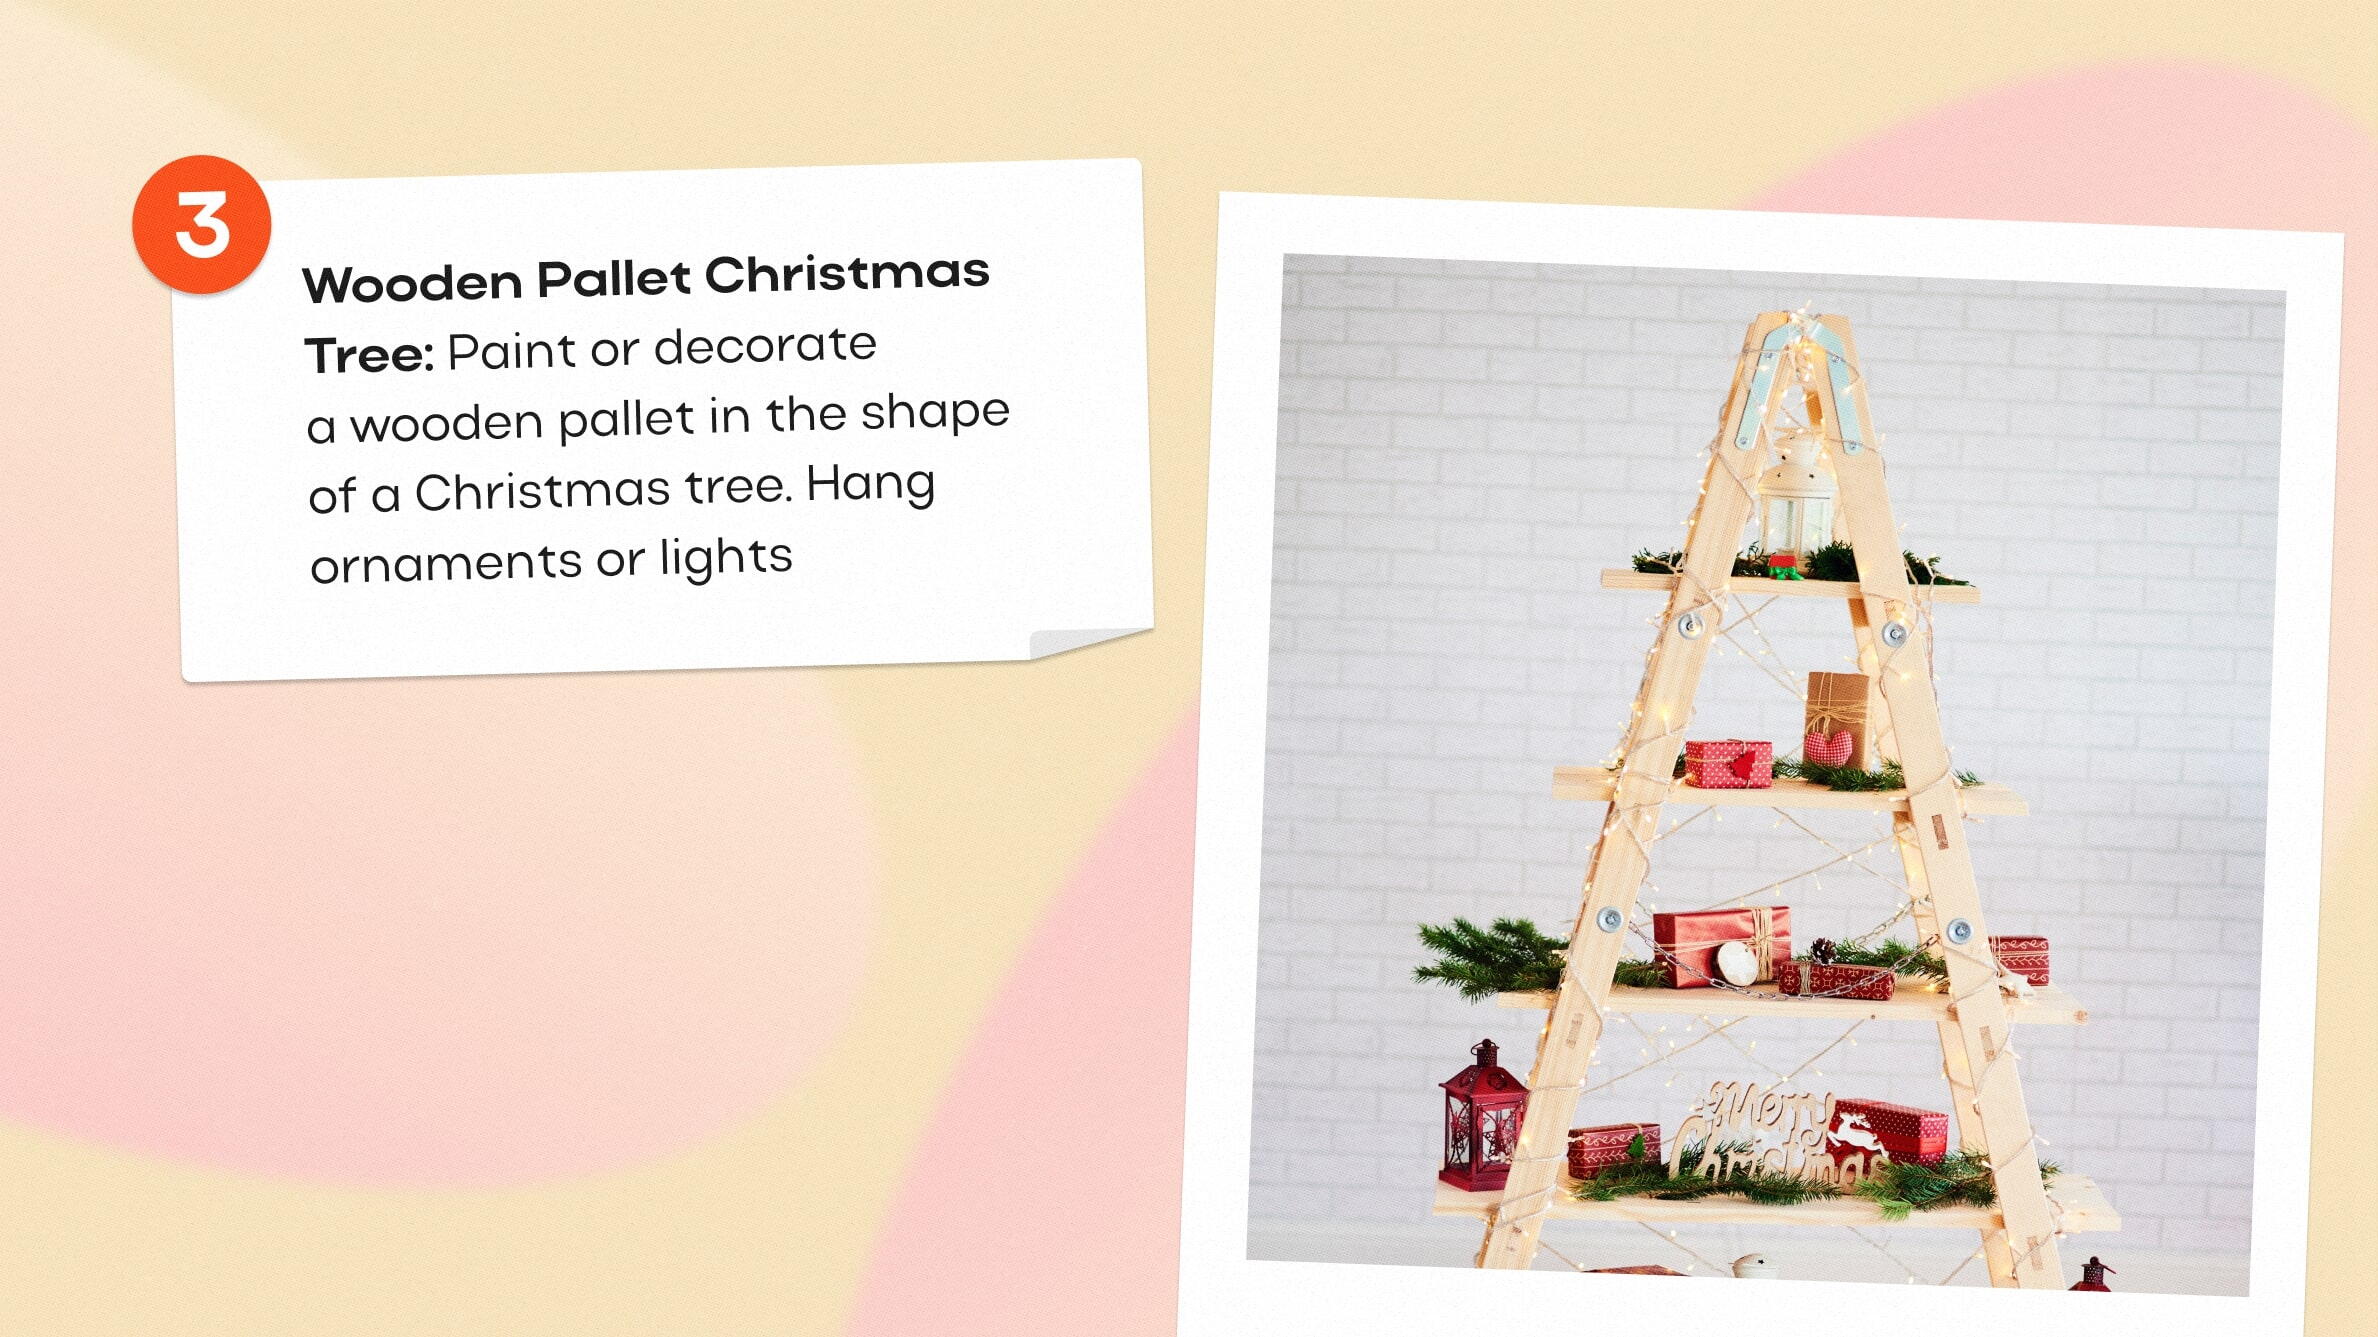 Wooden Pallet Christmas Tree